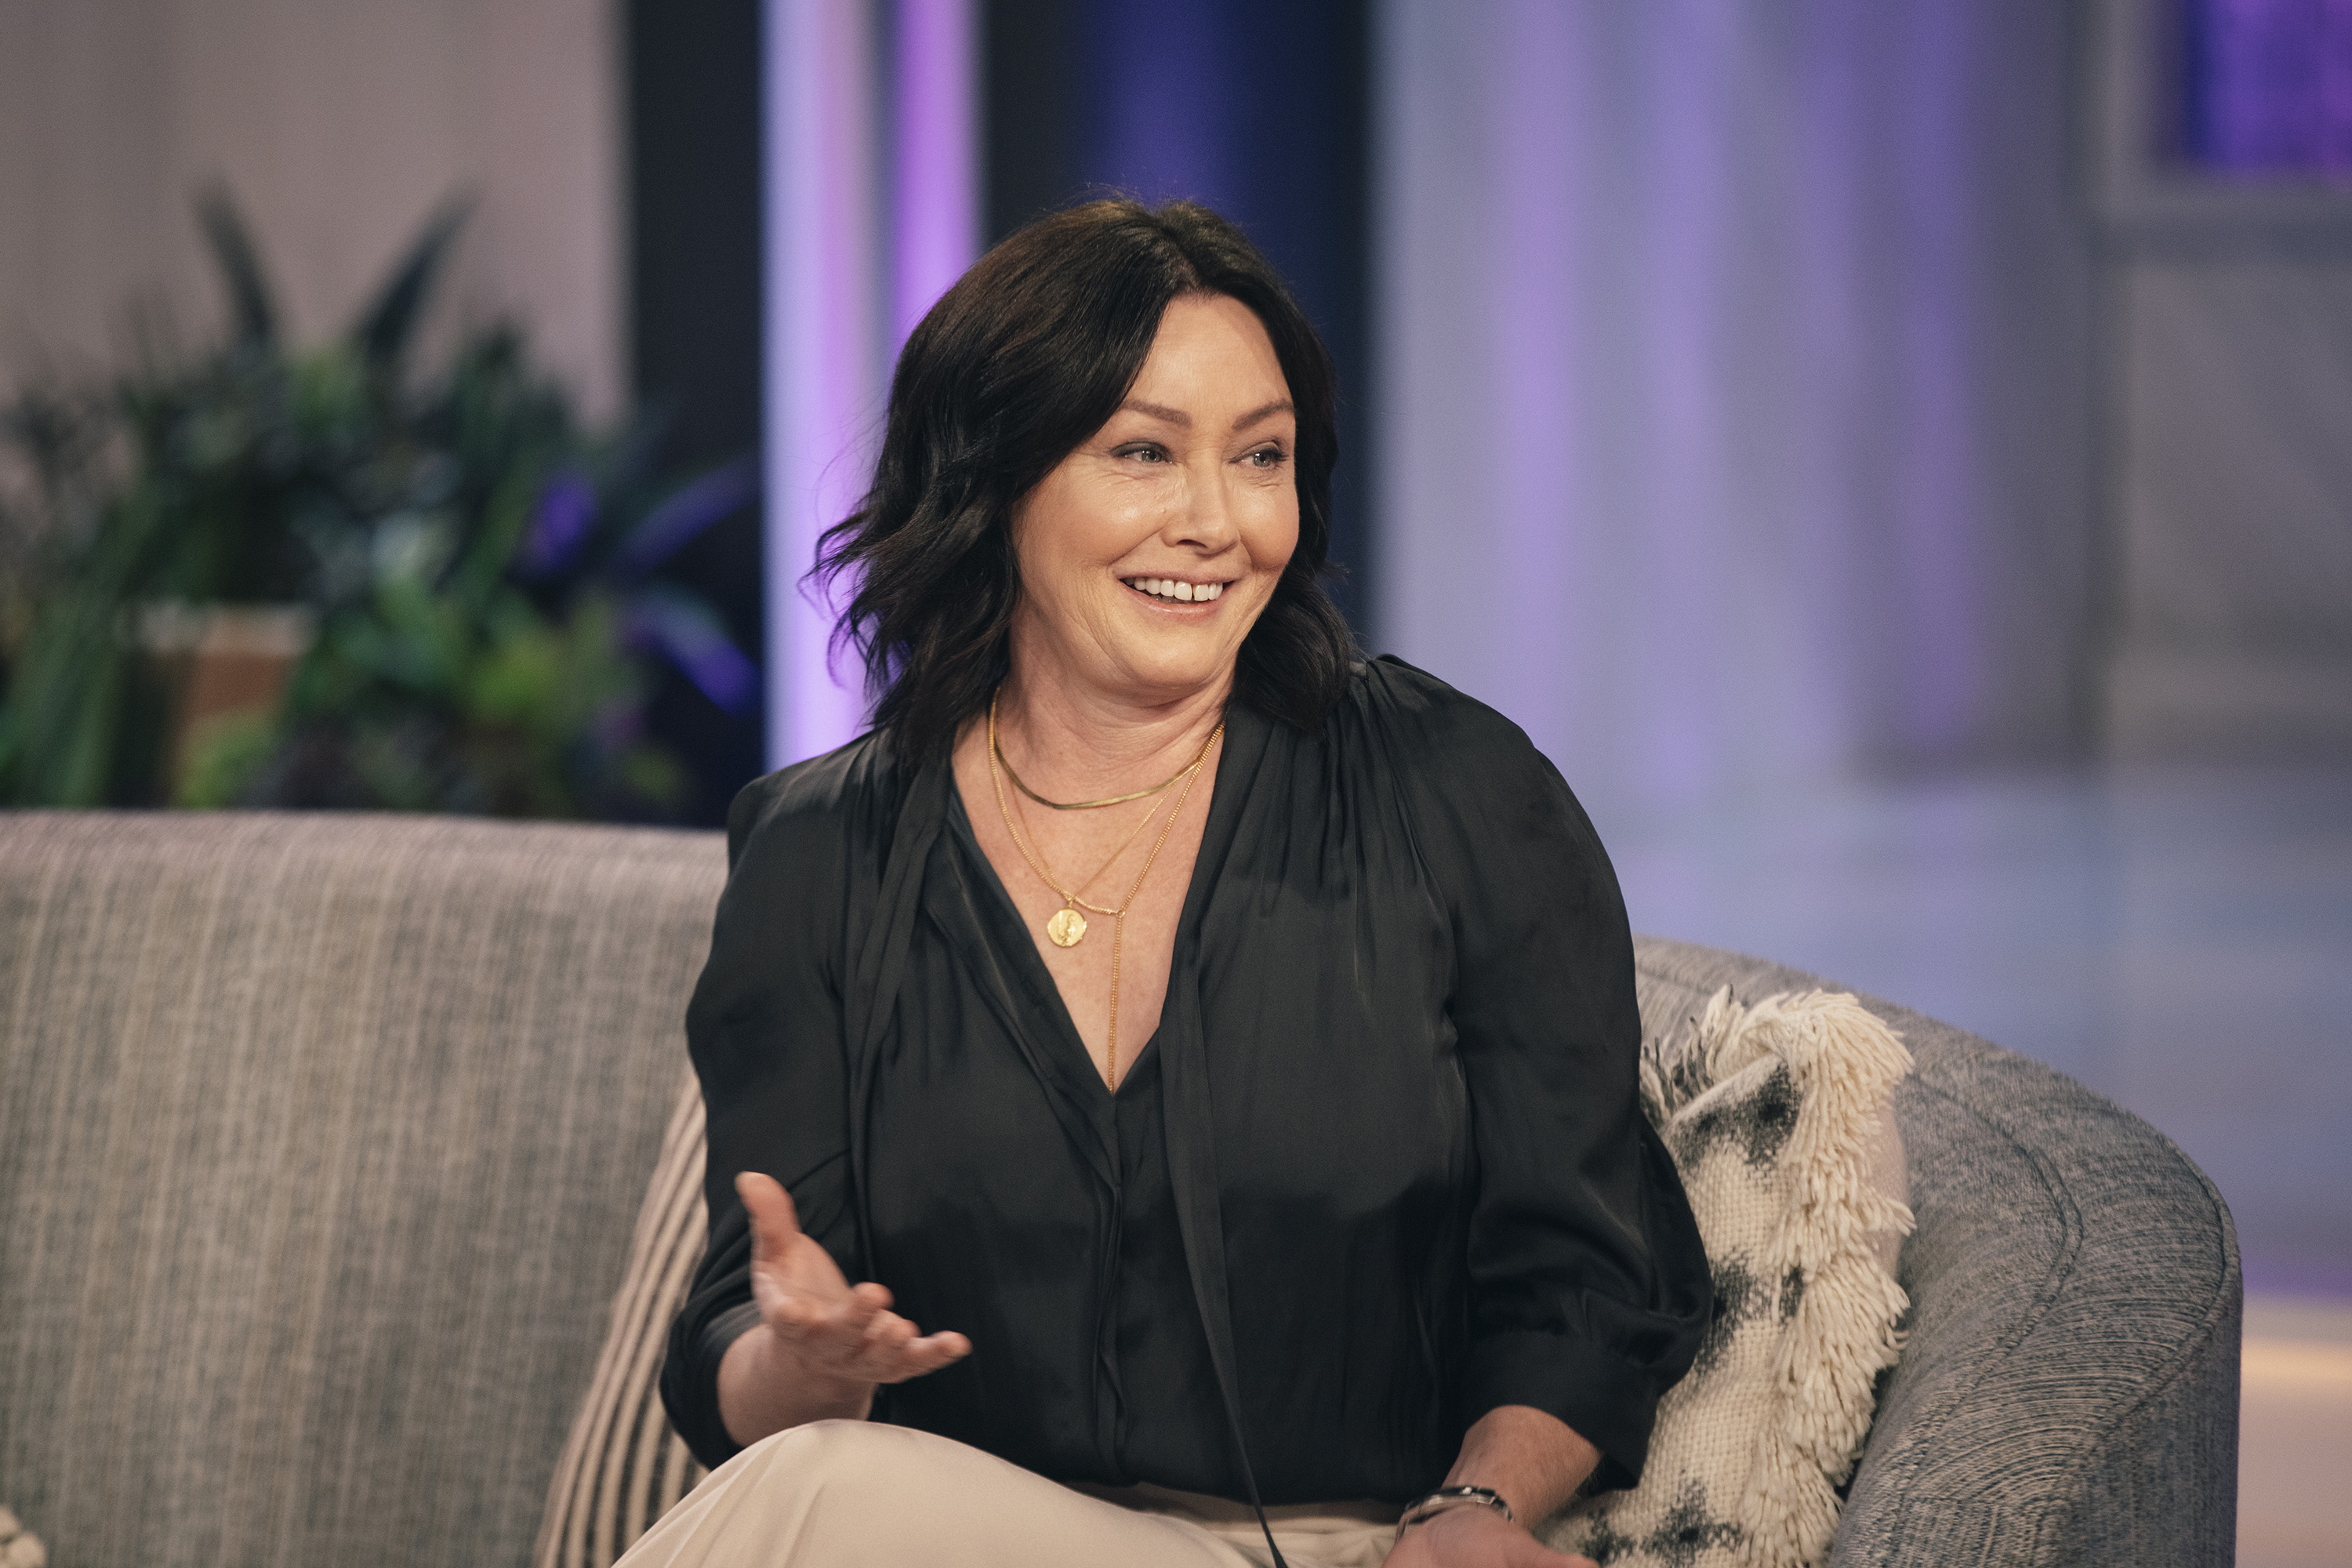 Shannen Doherty on "The Kelly Clarkson Show," 2021 | Source: Getty Images